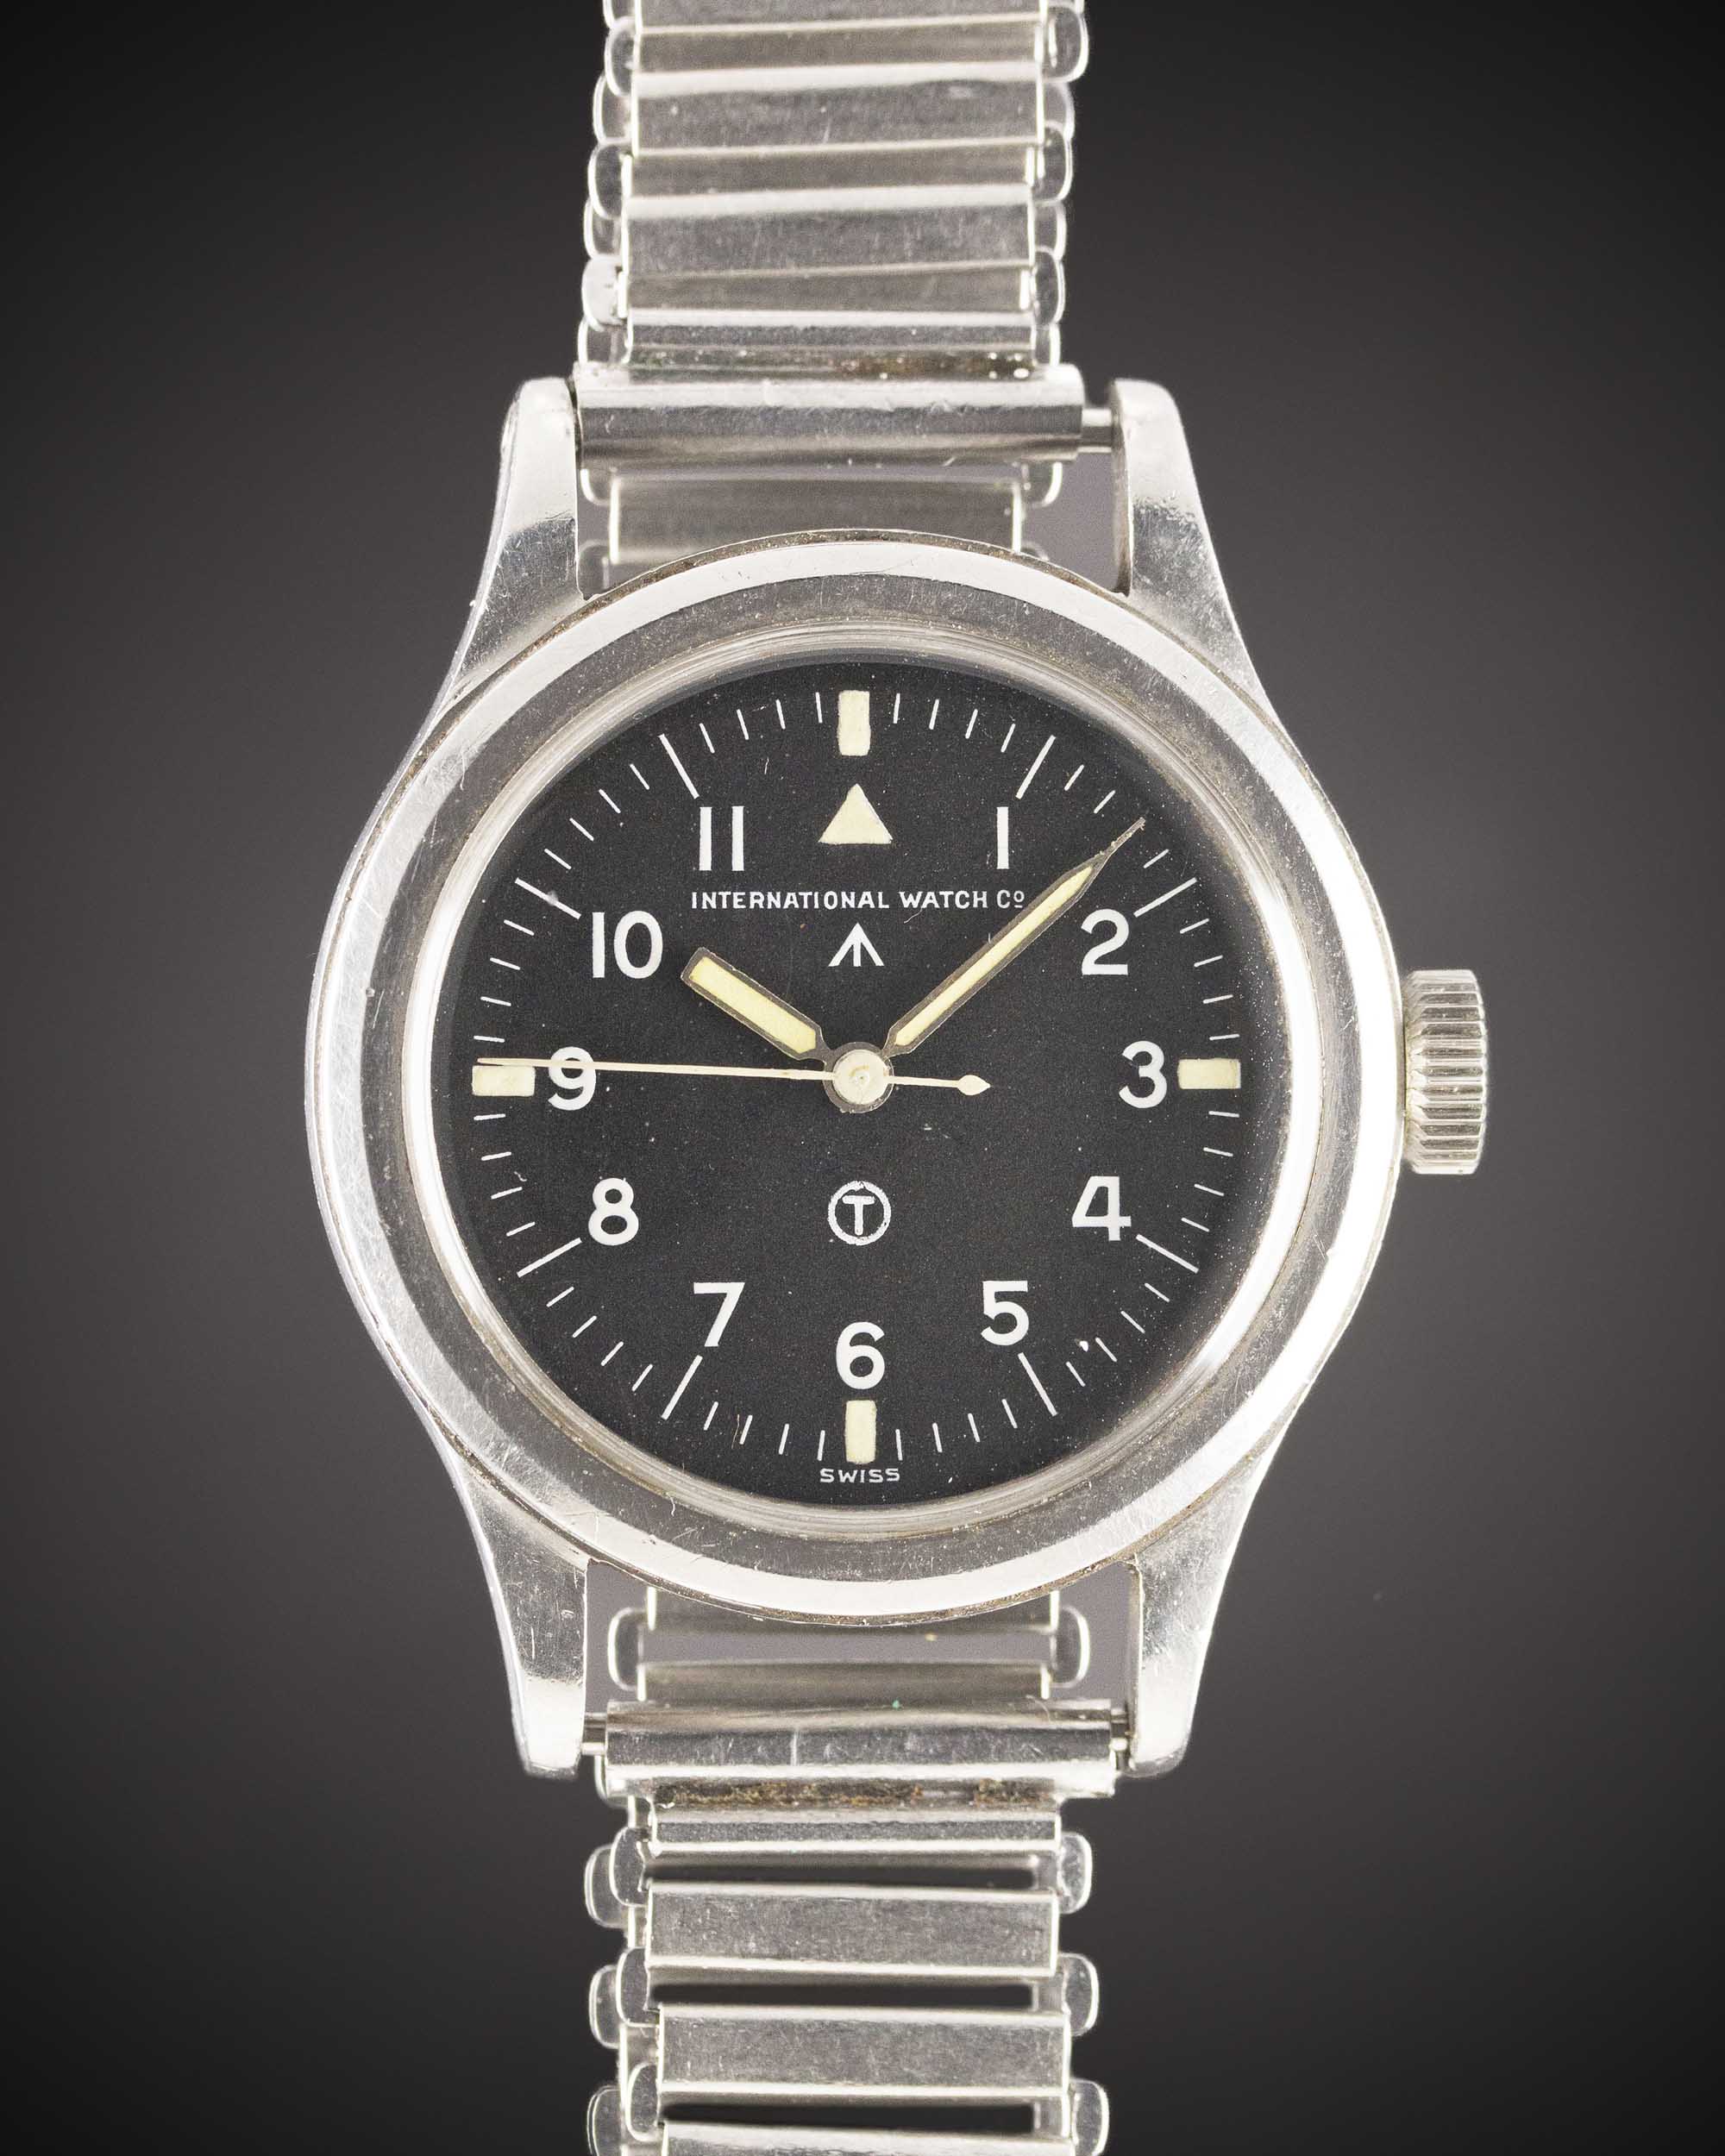 A GENTLEMAN'S STAINLESS STEEL BRITISH MILITARY IWC MARK 11 RAF PILOTS BRACELET WATCH DATED 1951 - Image 3 of 12